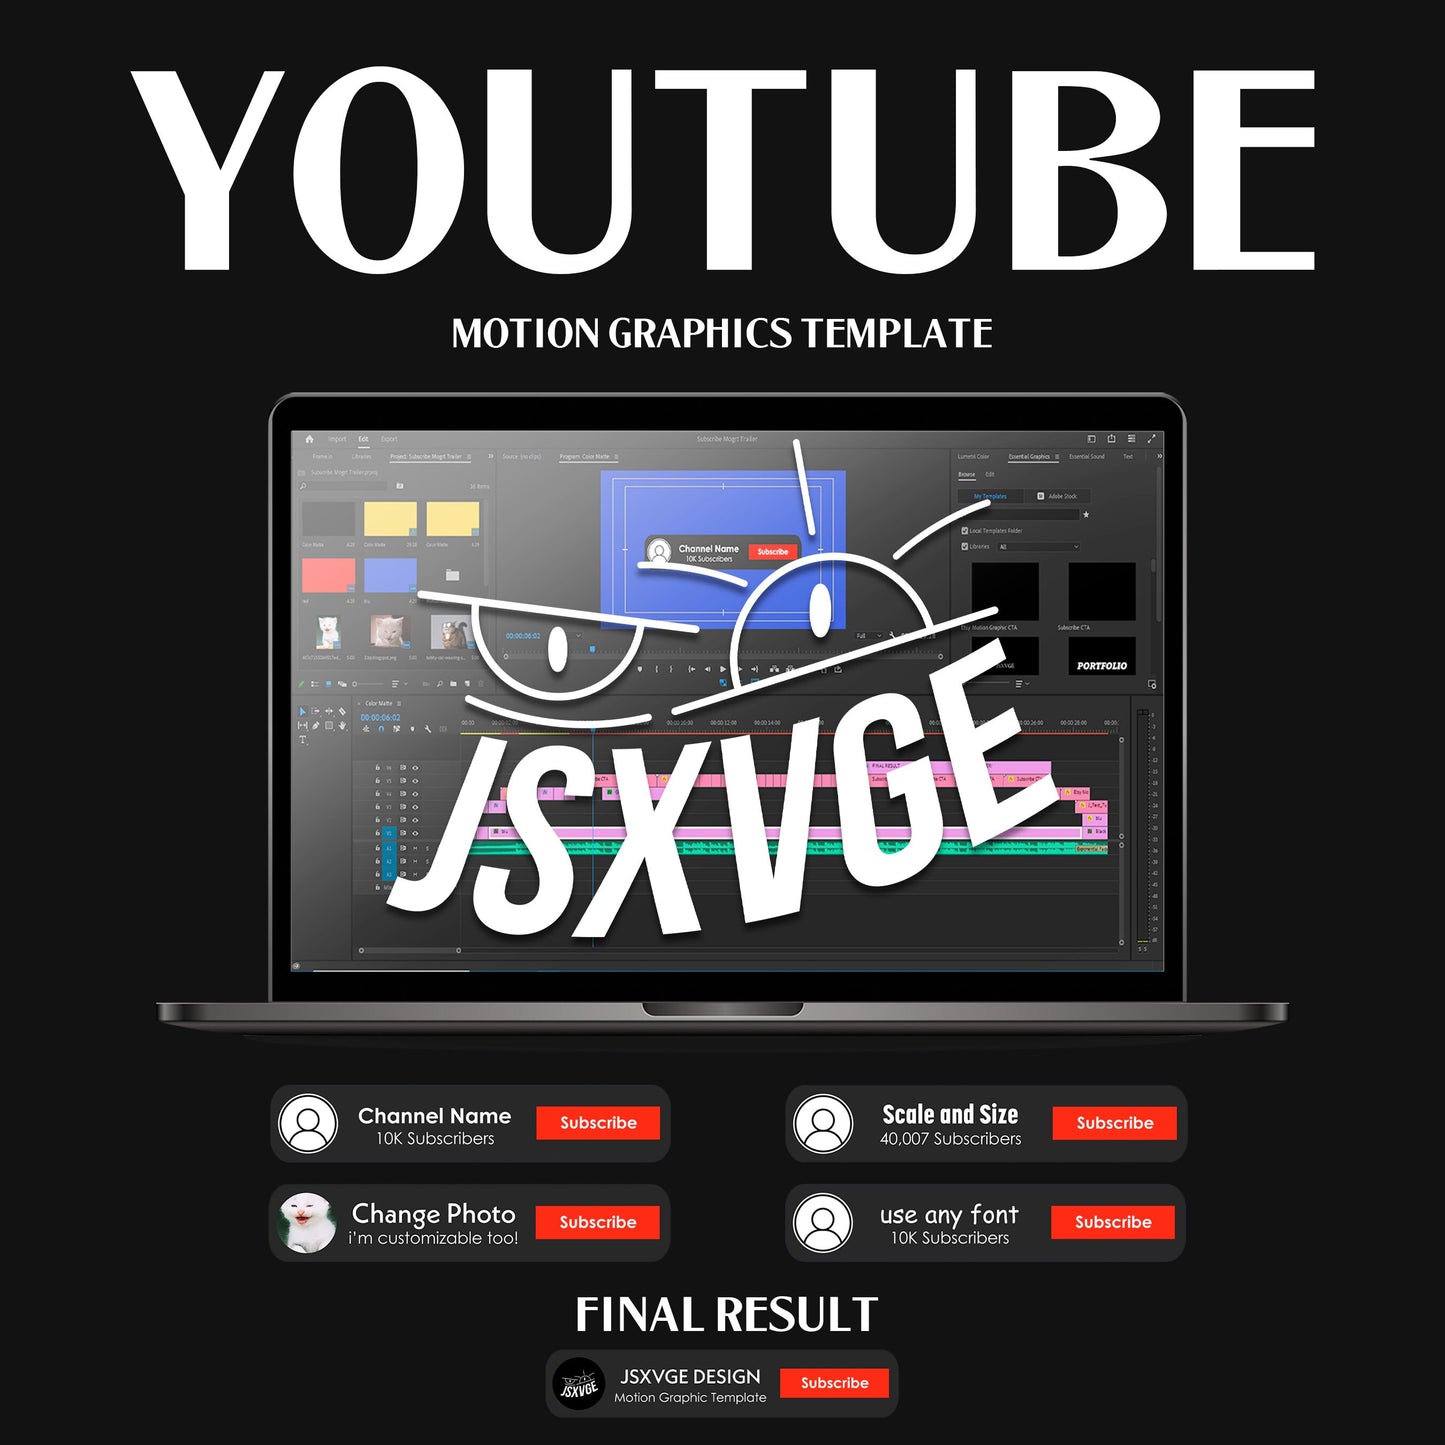 Youtube Call to Action Motion Graphics Template Youtube Subscribe Button Animated Motion Graphics .MOGRT Adobe Premiere Pro -JSXVGE DESIGN